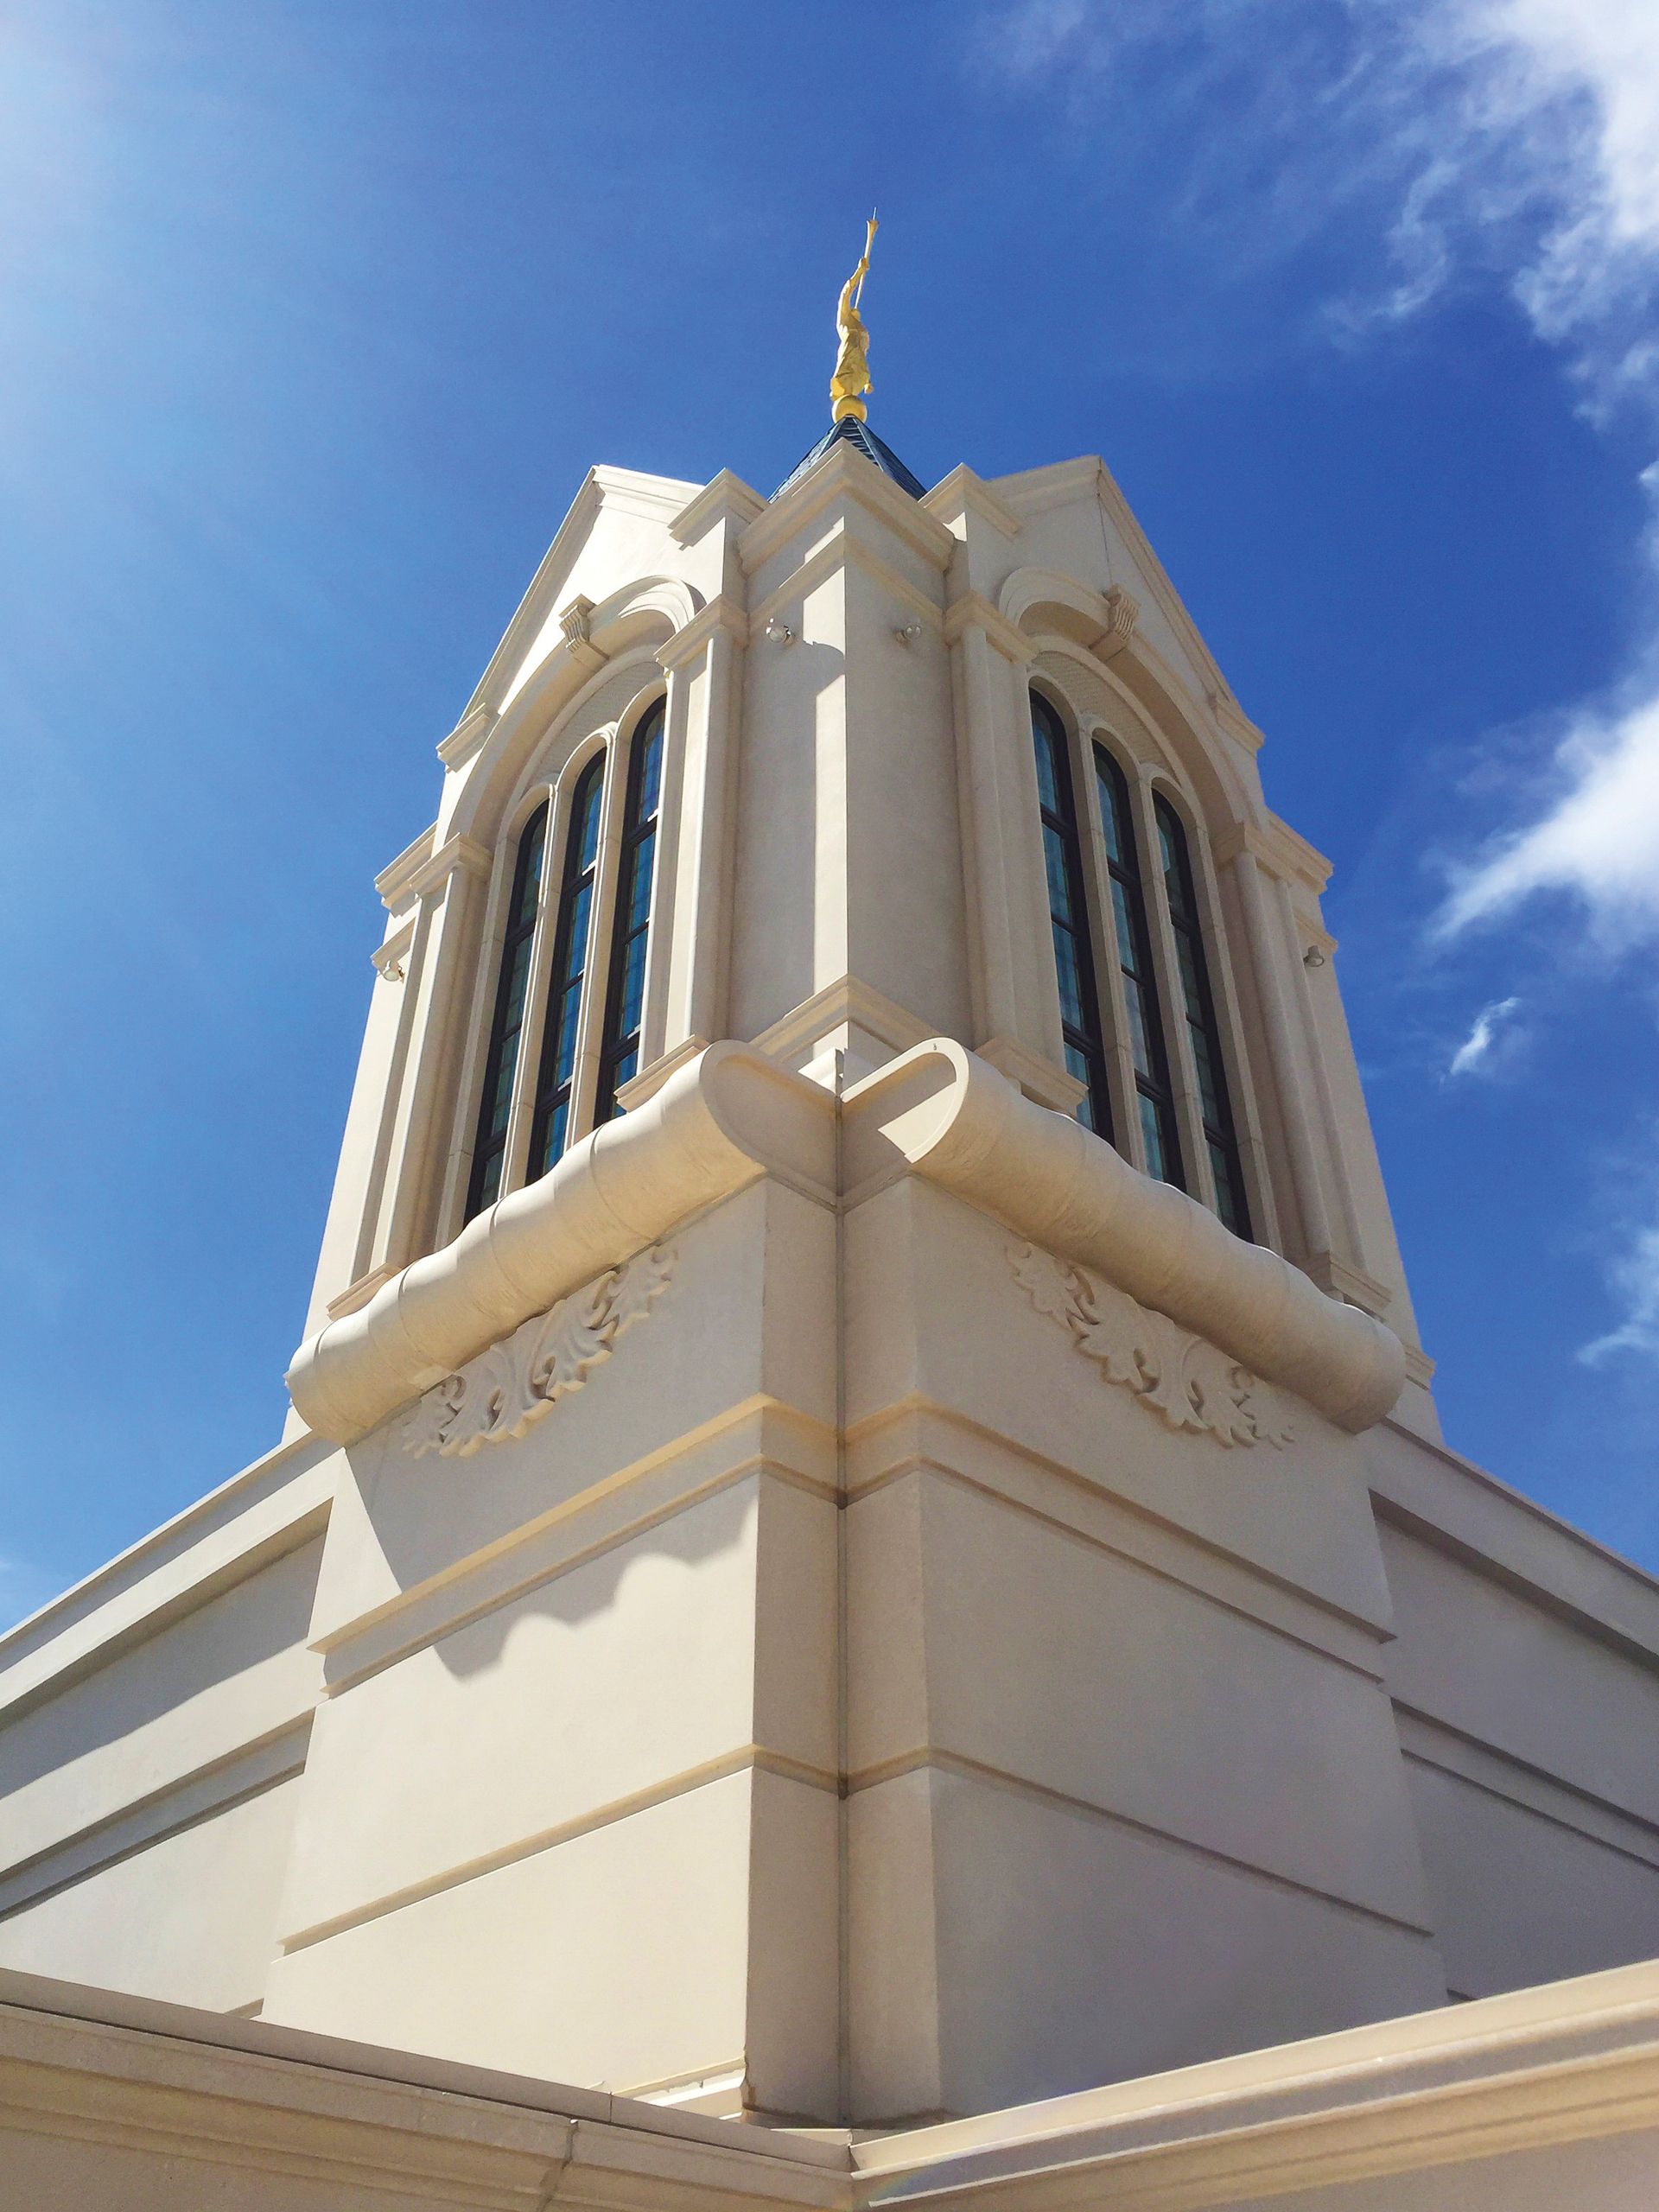 An image of the steeple on the Fort Collins Colorado Temple.